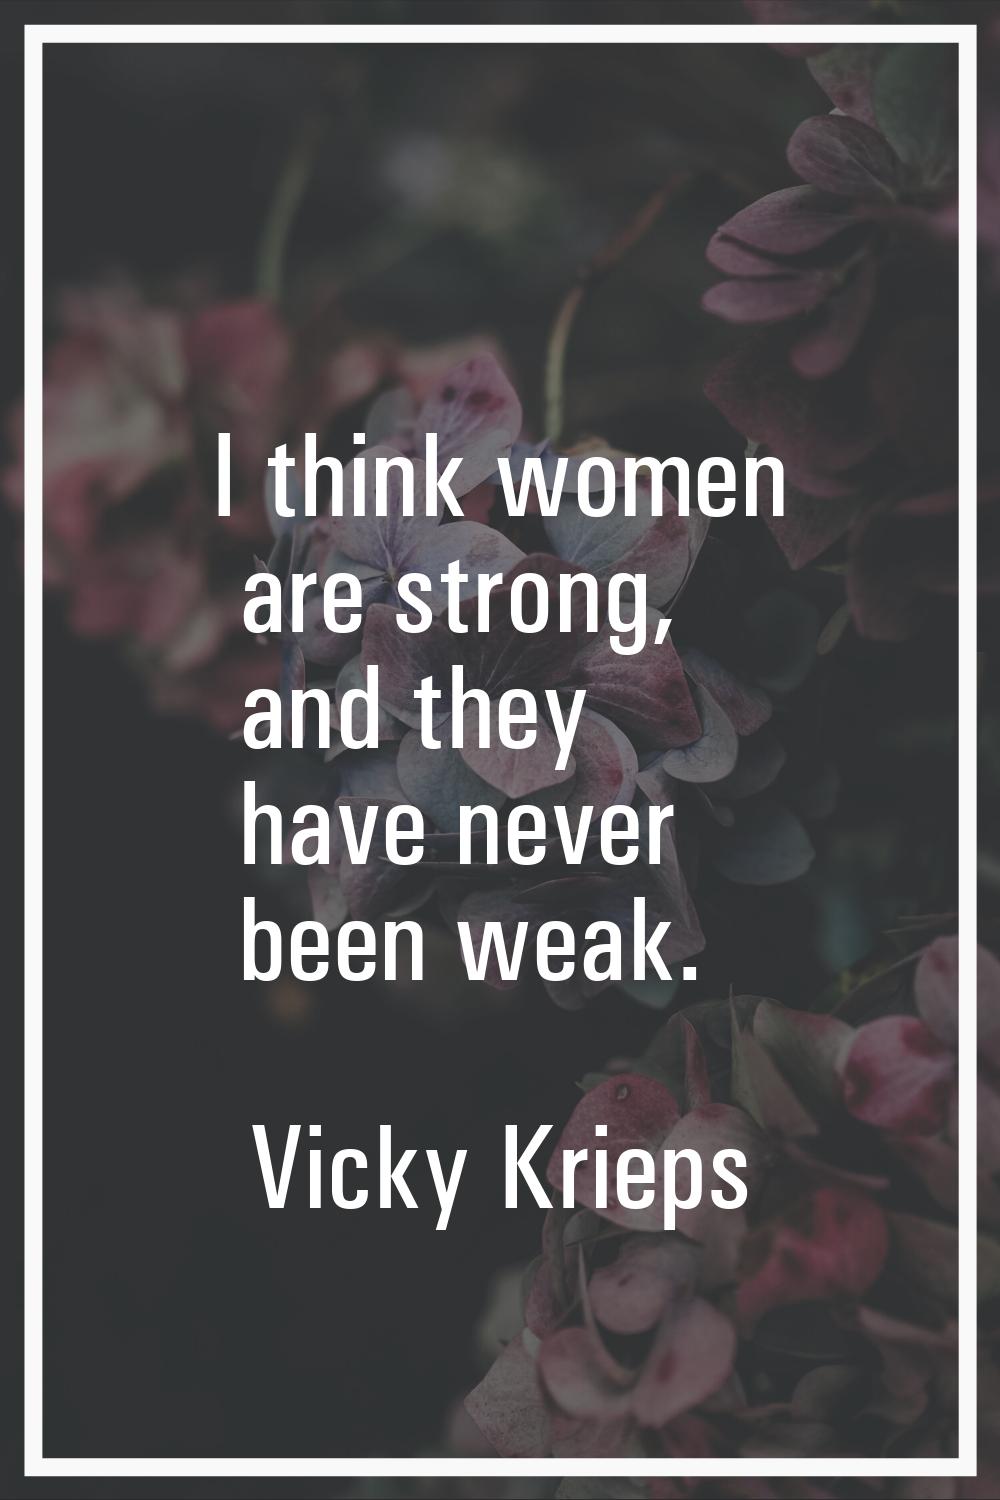 I think women are strong, and they have never been weak.